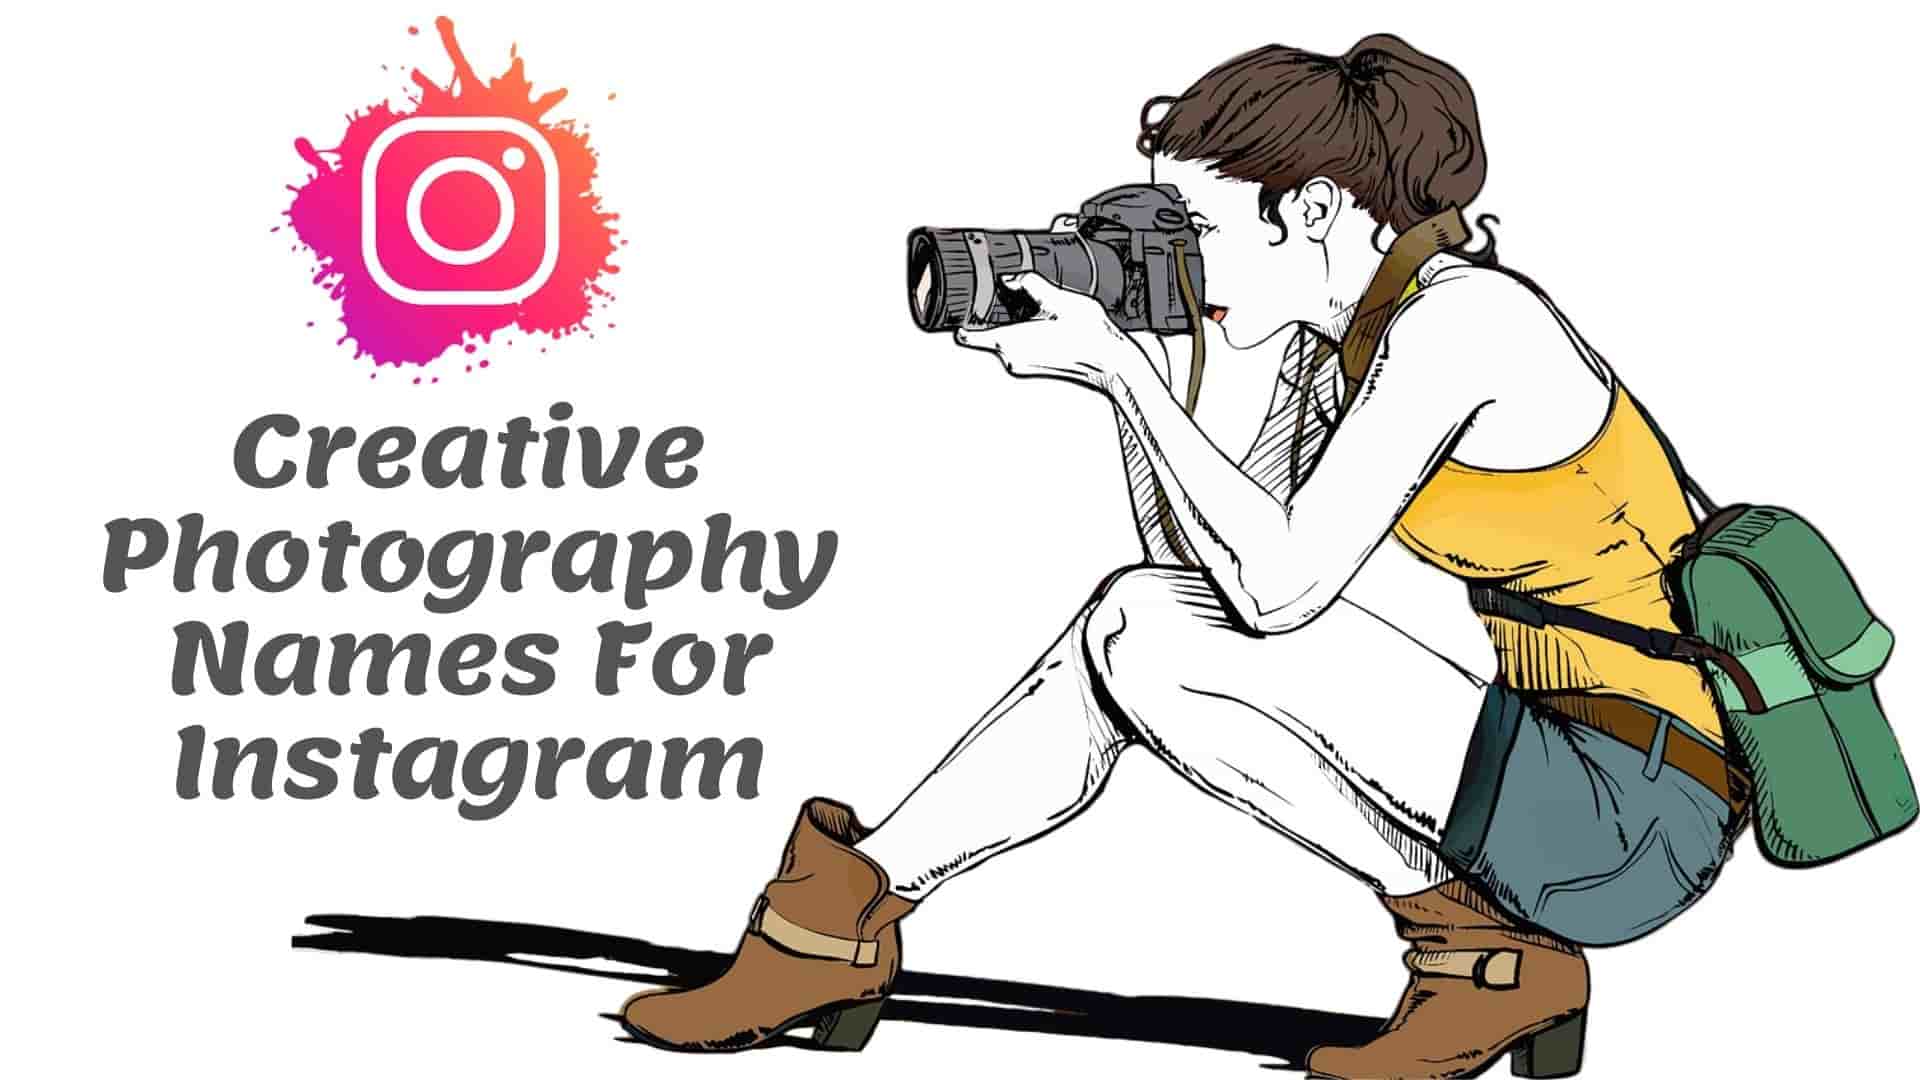 Cute And Creative Photography Names For Instagram, Names For Instagram Photography Page, Cute Photography Name Ideas, Aesthetic Photography Usernames, Mobile Photography Page Names For Instagram, Photography Username Ideas, Photographer Nicknames For Instagram, Creative Photography Usernames For Instagram